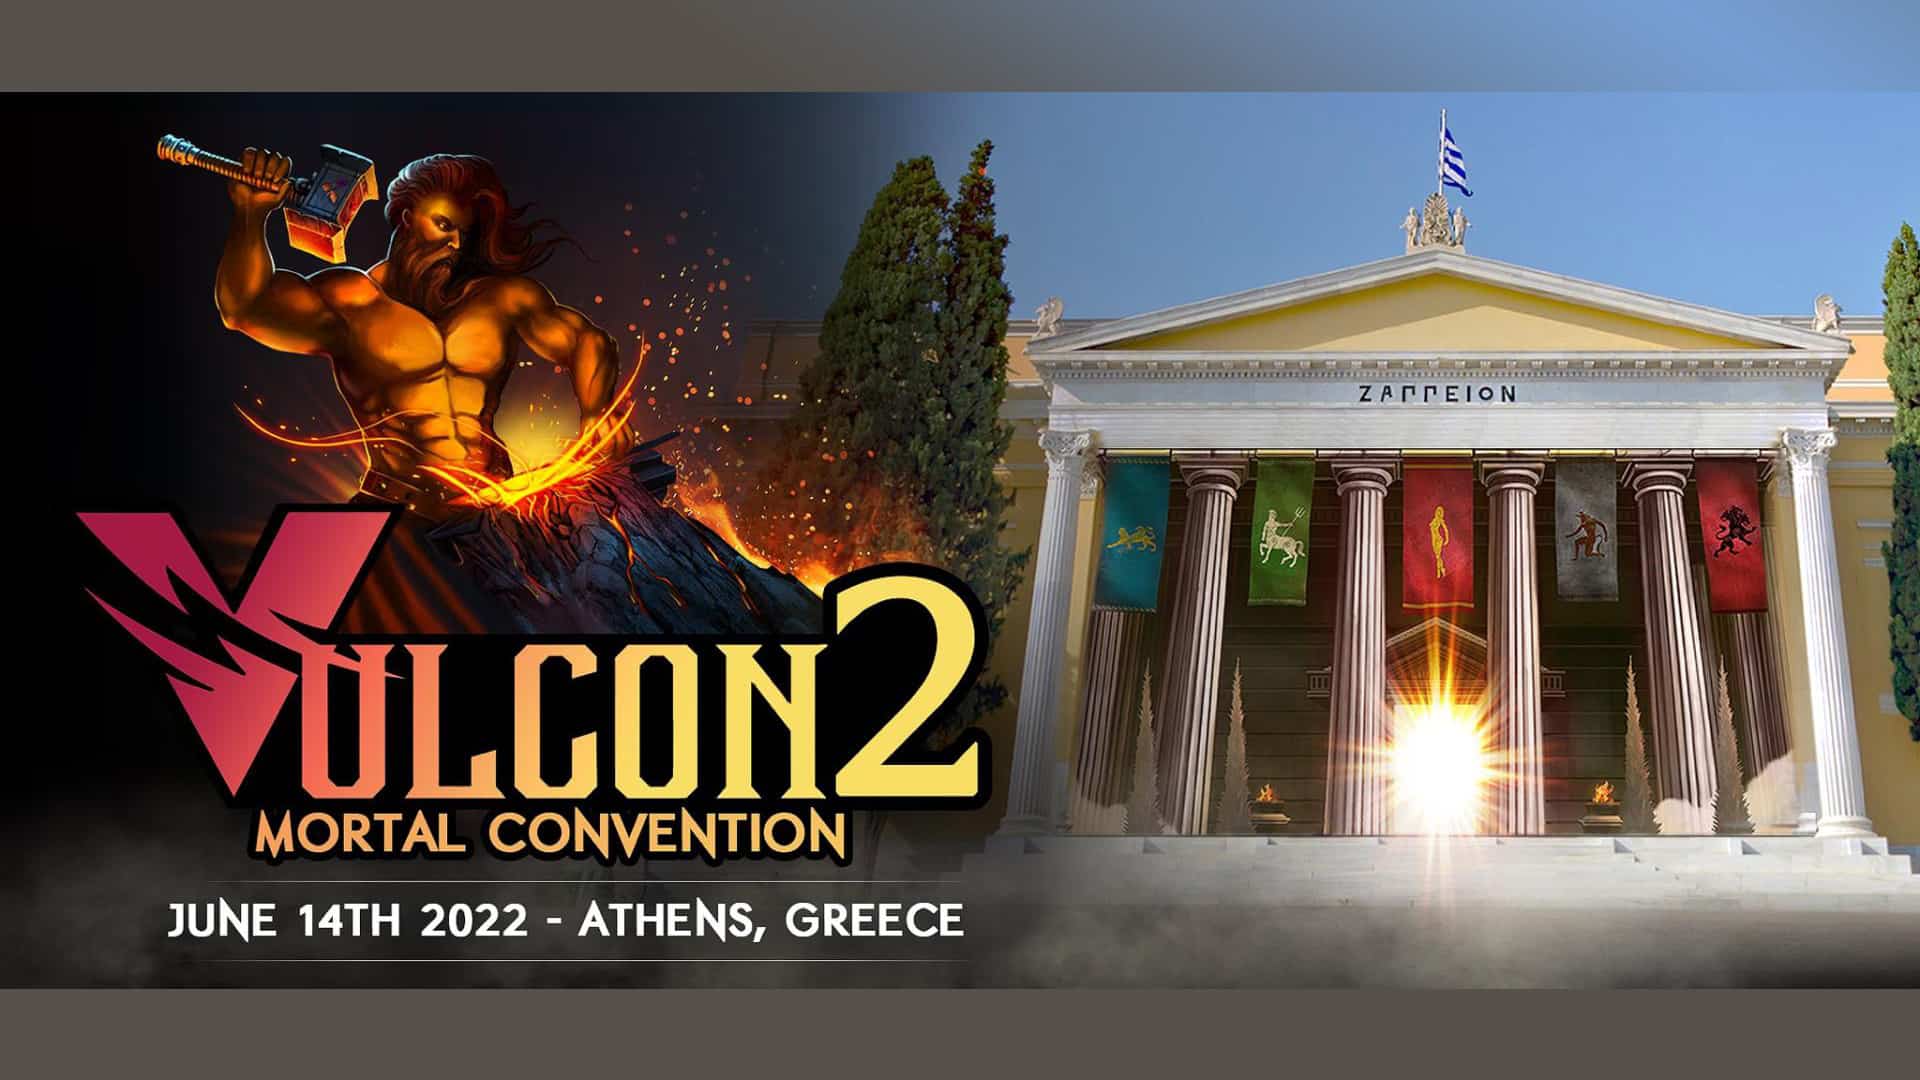 Vulcon2 Meetup in Zappeion Athens